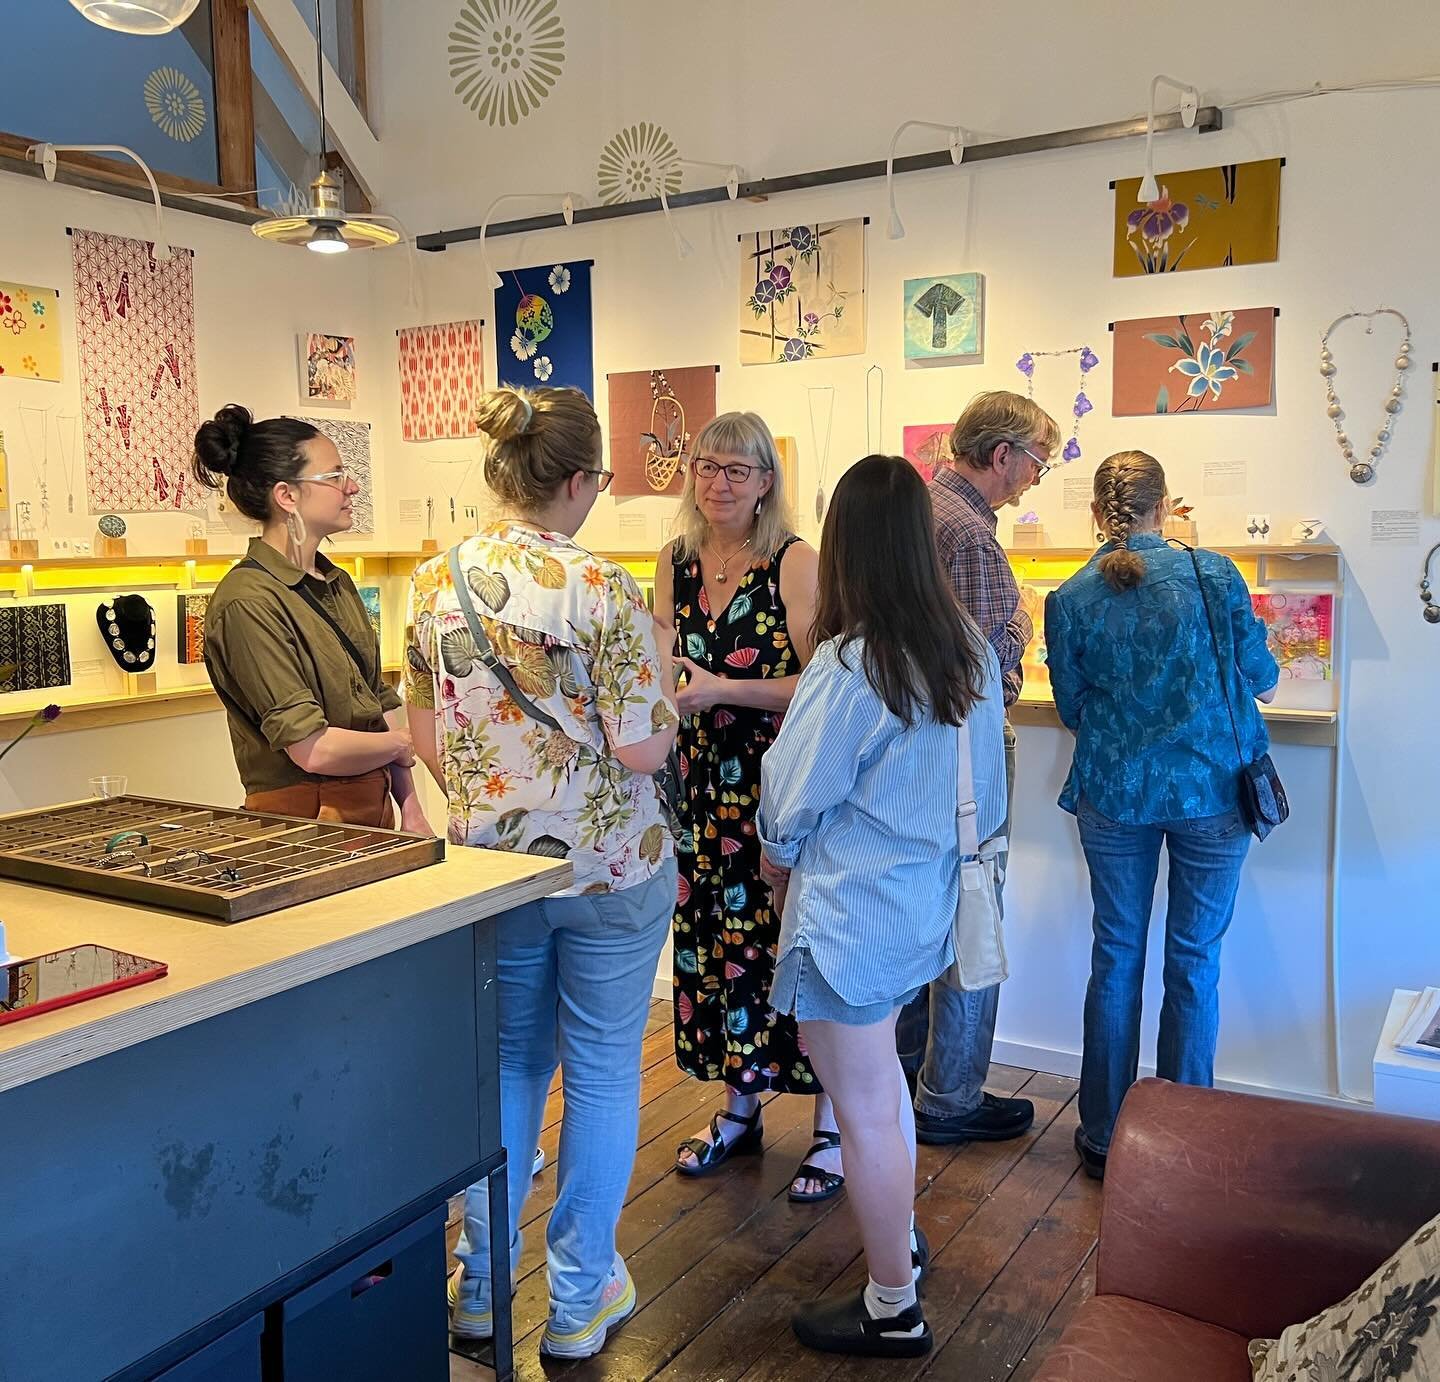 Beautiful show now on view @danacadesignstudio ~ be sure to check it out if you&rsquo;re in the Seattle area! Featuring work by @bonnemanancy @flyingfoxjewelry_julialowther @tisha.abrahamsen @carolina_andersson.25 @danacassara @cytoops @vicky_z_pa @f